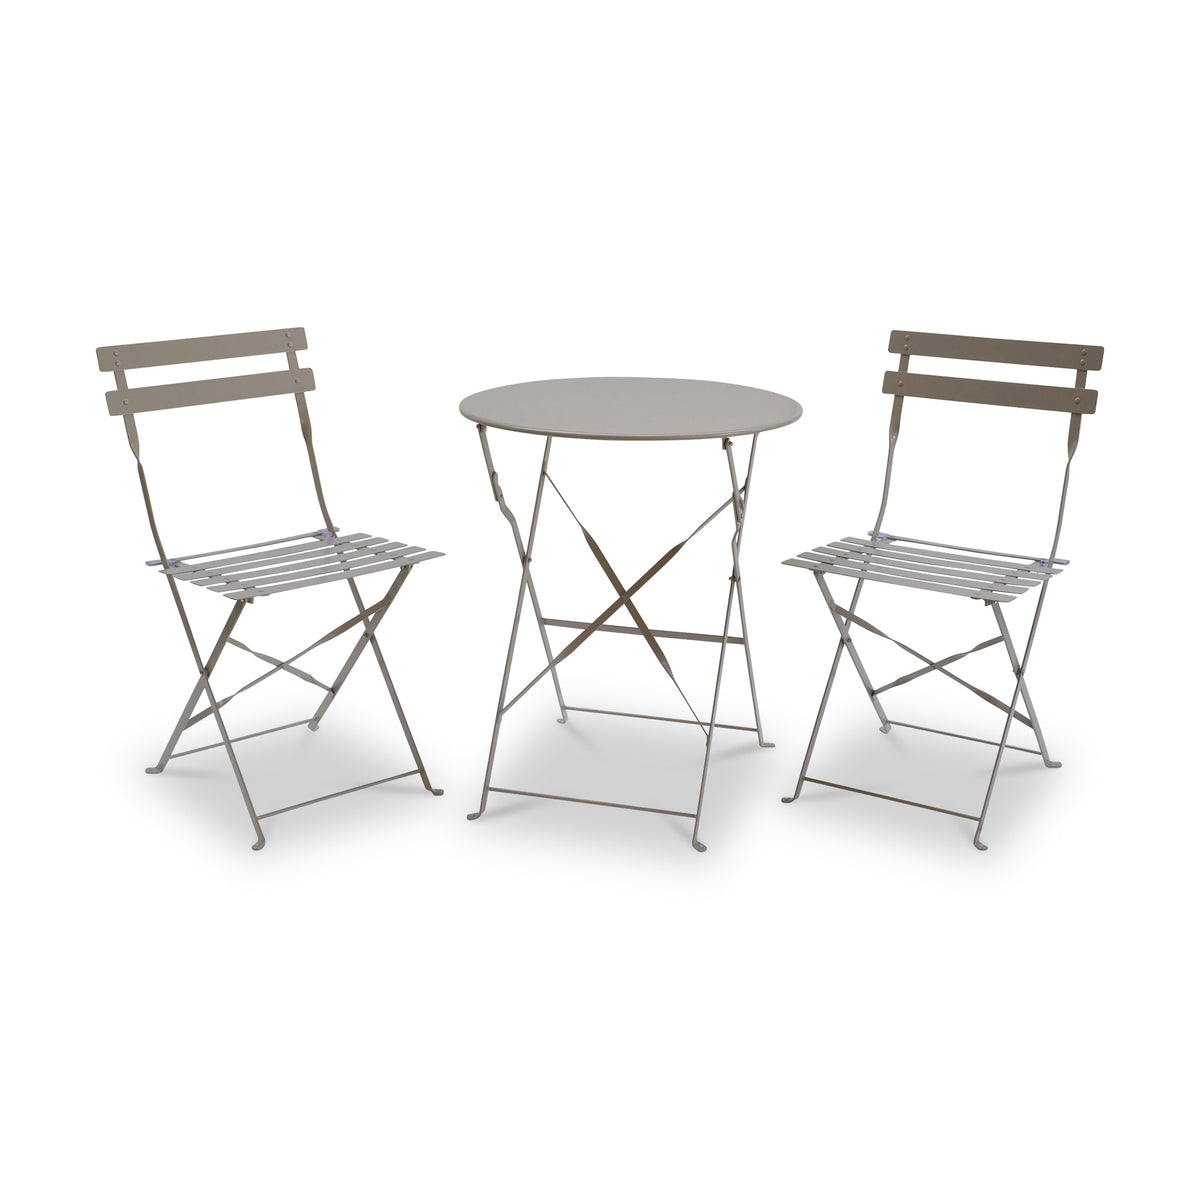 Padstow Champagne 60cm Bistro Set from Roseland Furniture